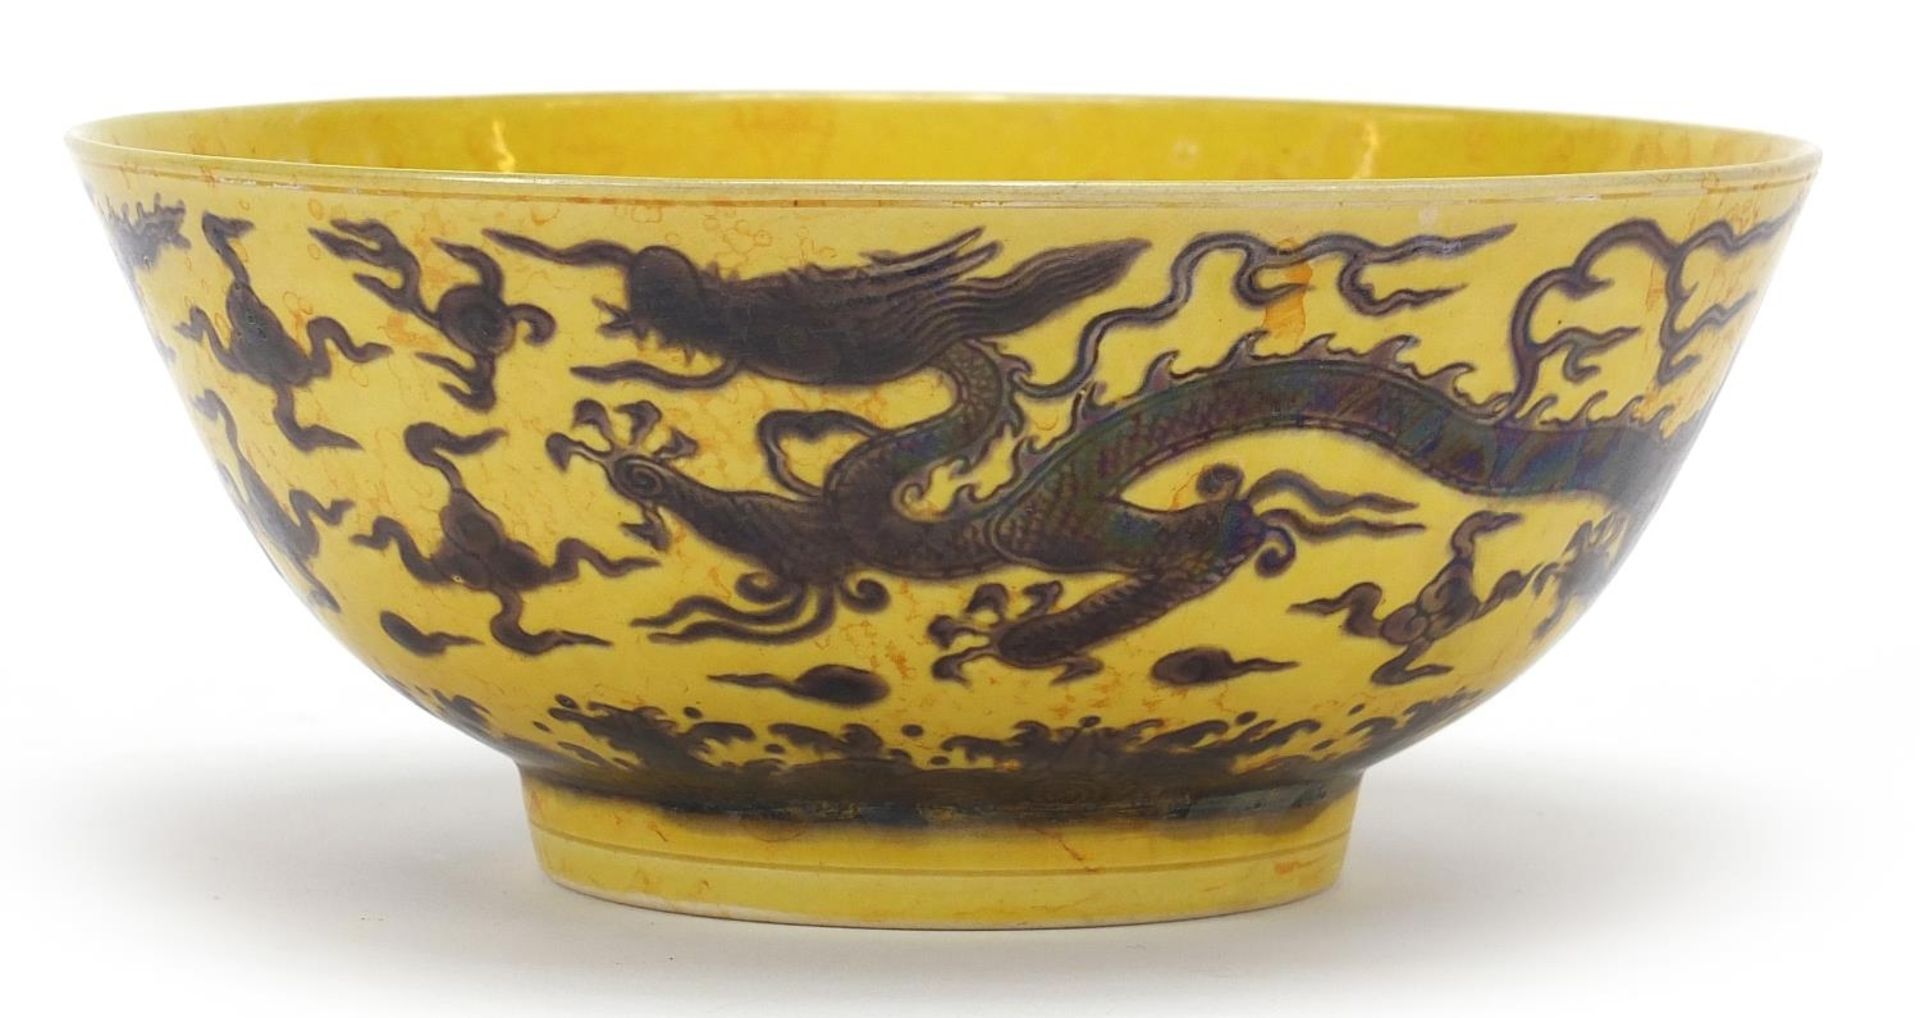 Chinese yellow porcelain bowl hand painted with dragons on the exterior, blue six figure character